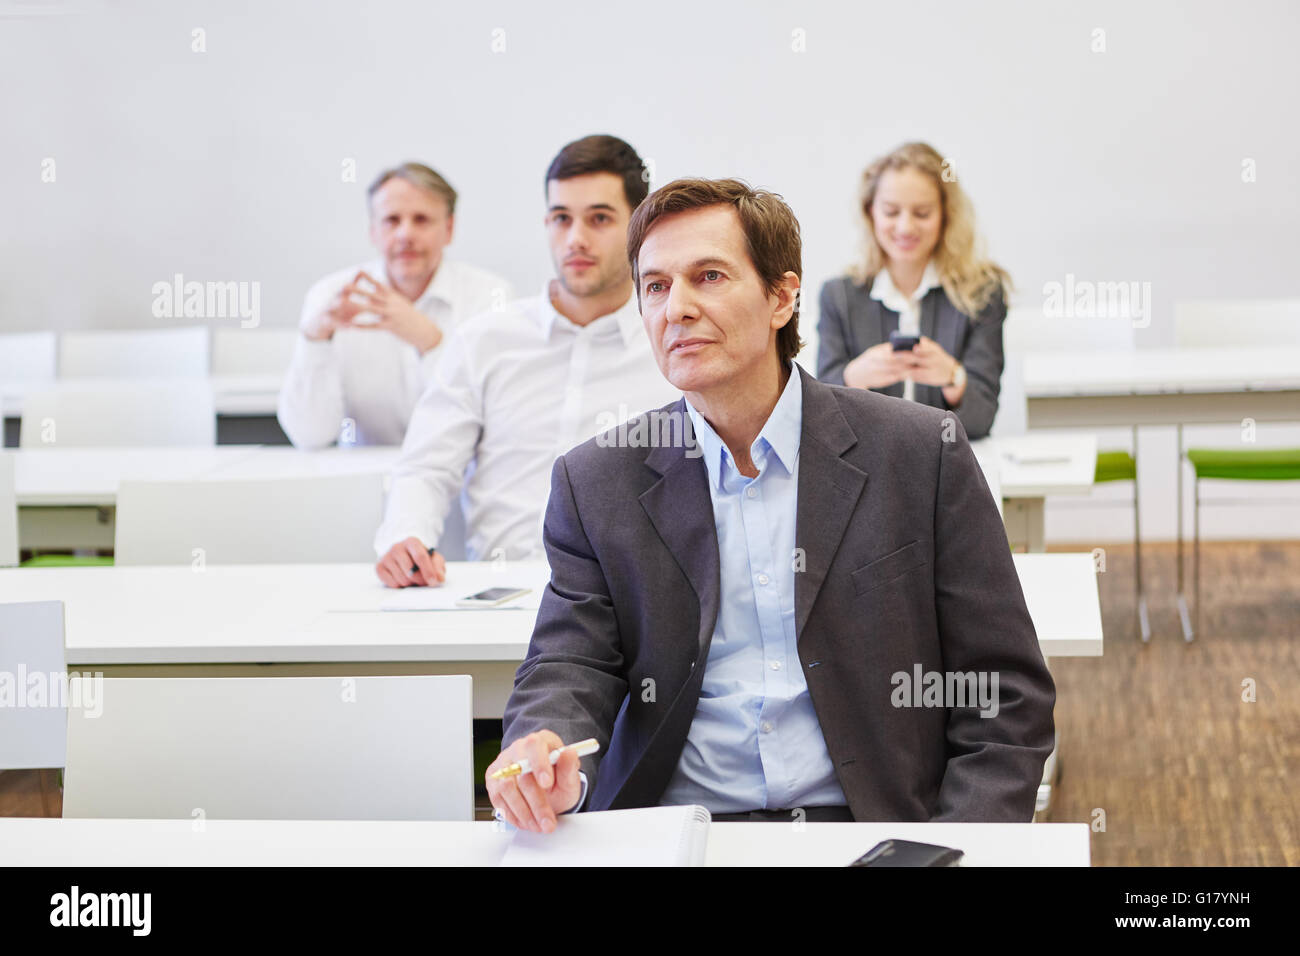 Business people in a business seminar listening to a spreech Stock Photo